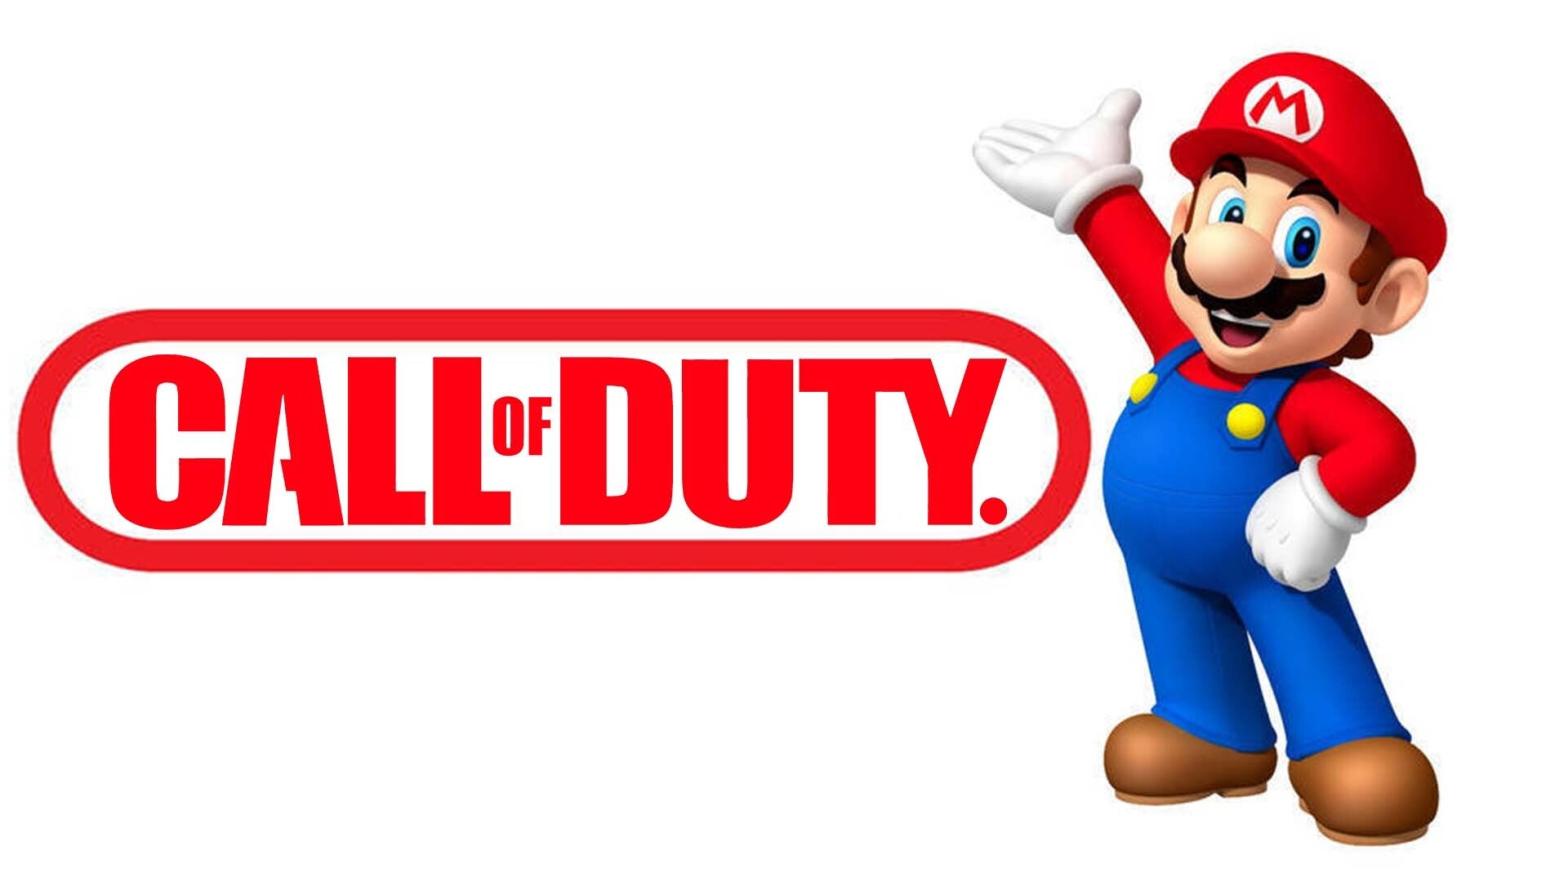 'It's-a Me, Call of Duty!